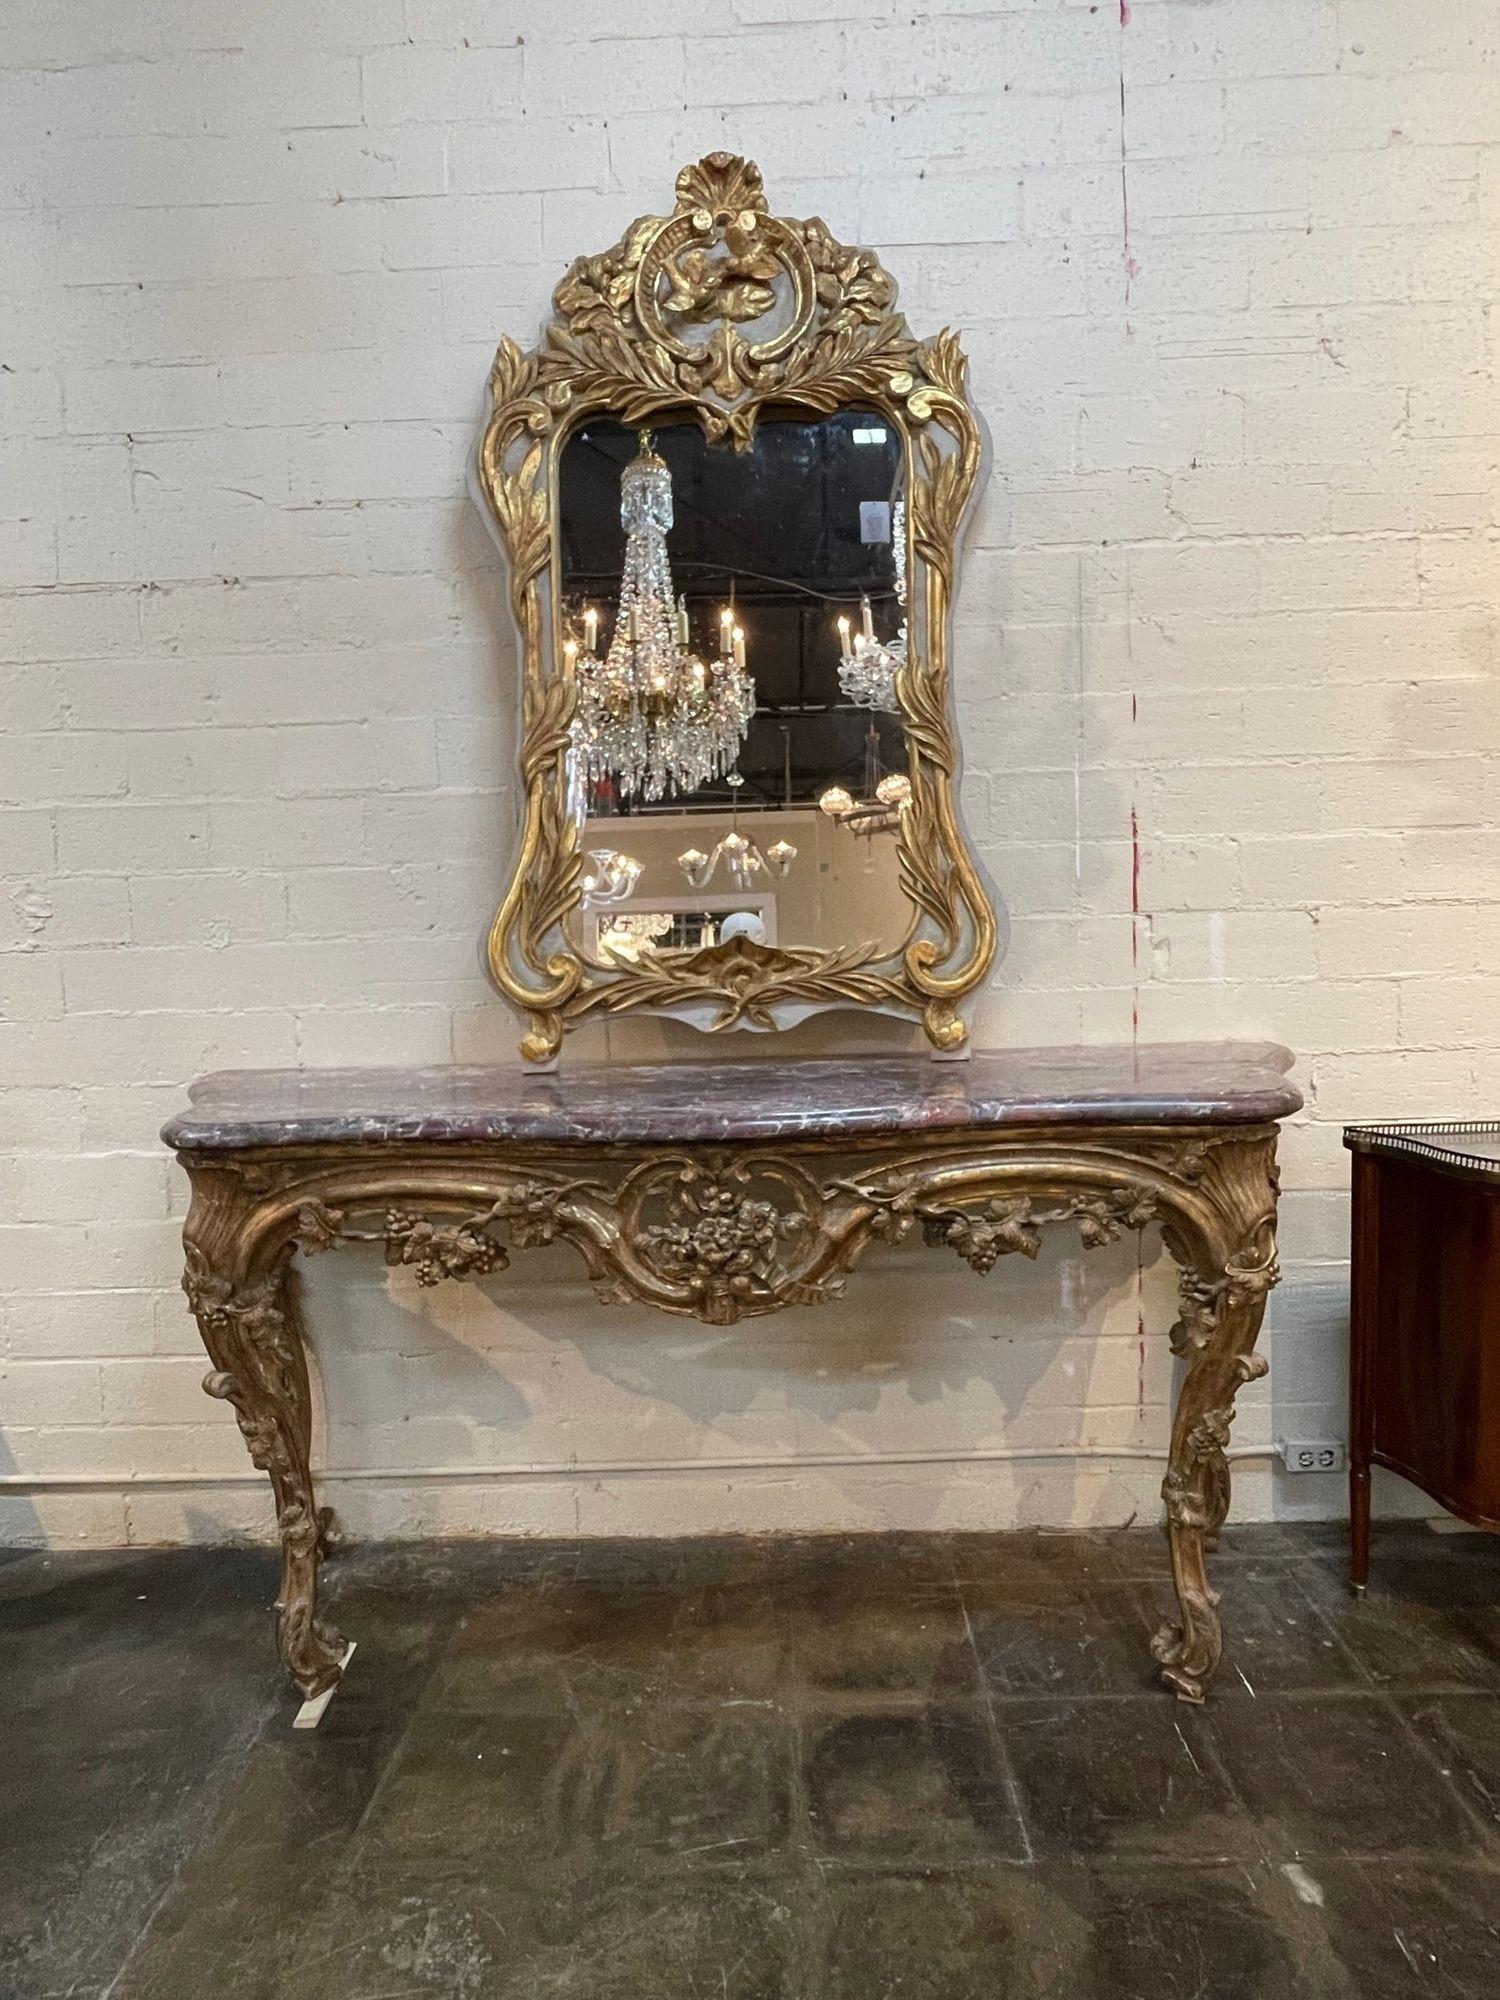 Elegant 19th century French Louis XV carved and giltwood console. Featuring very fine carvings and gold gilt along with a beautiful marble top. An exceptional piece!!